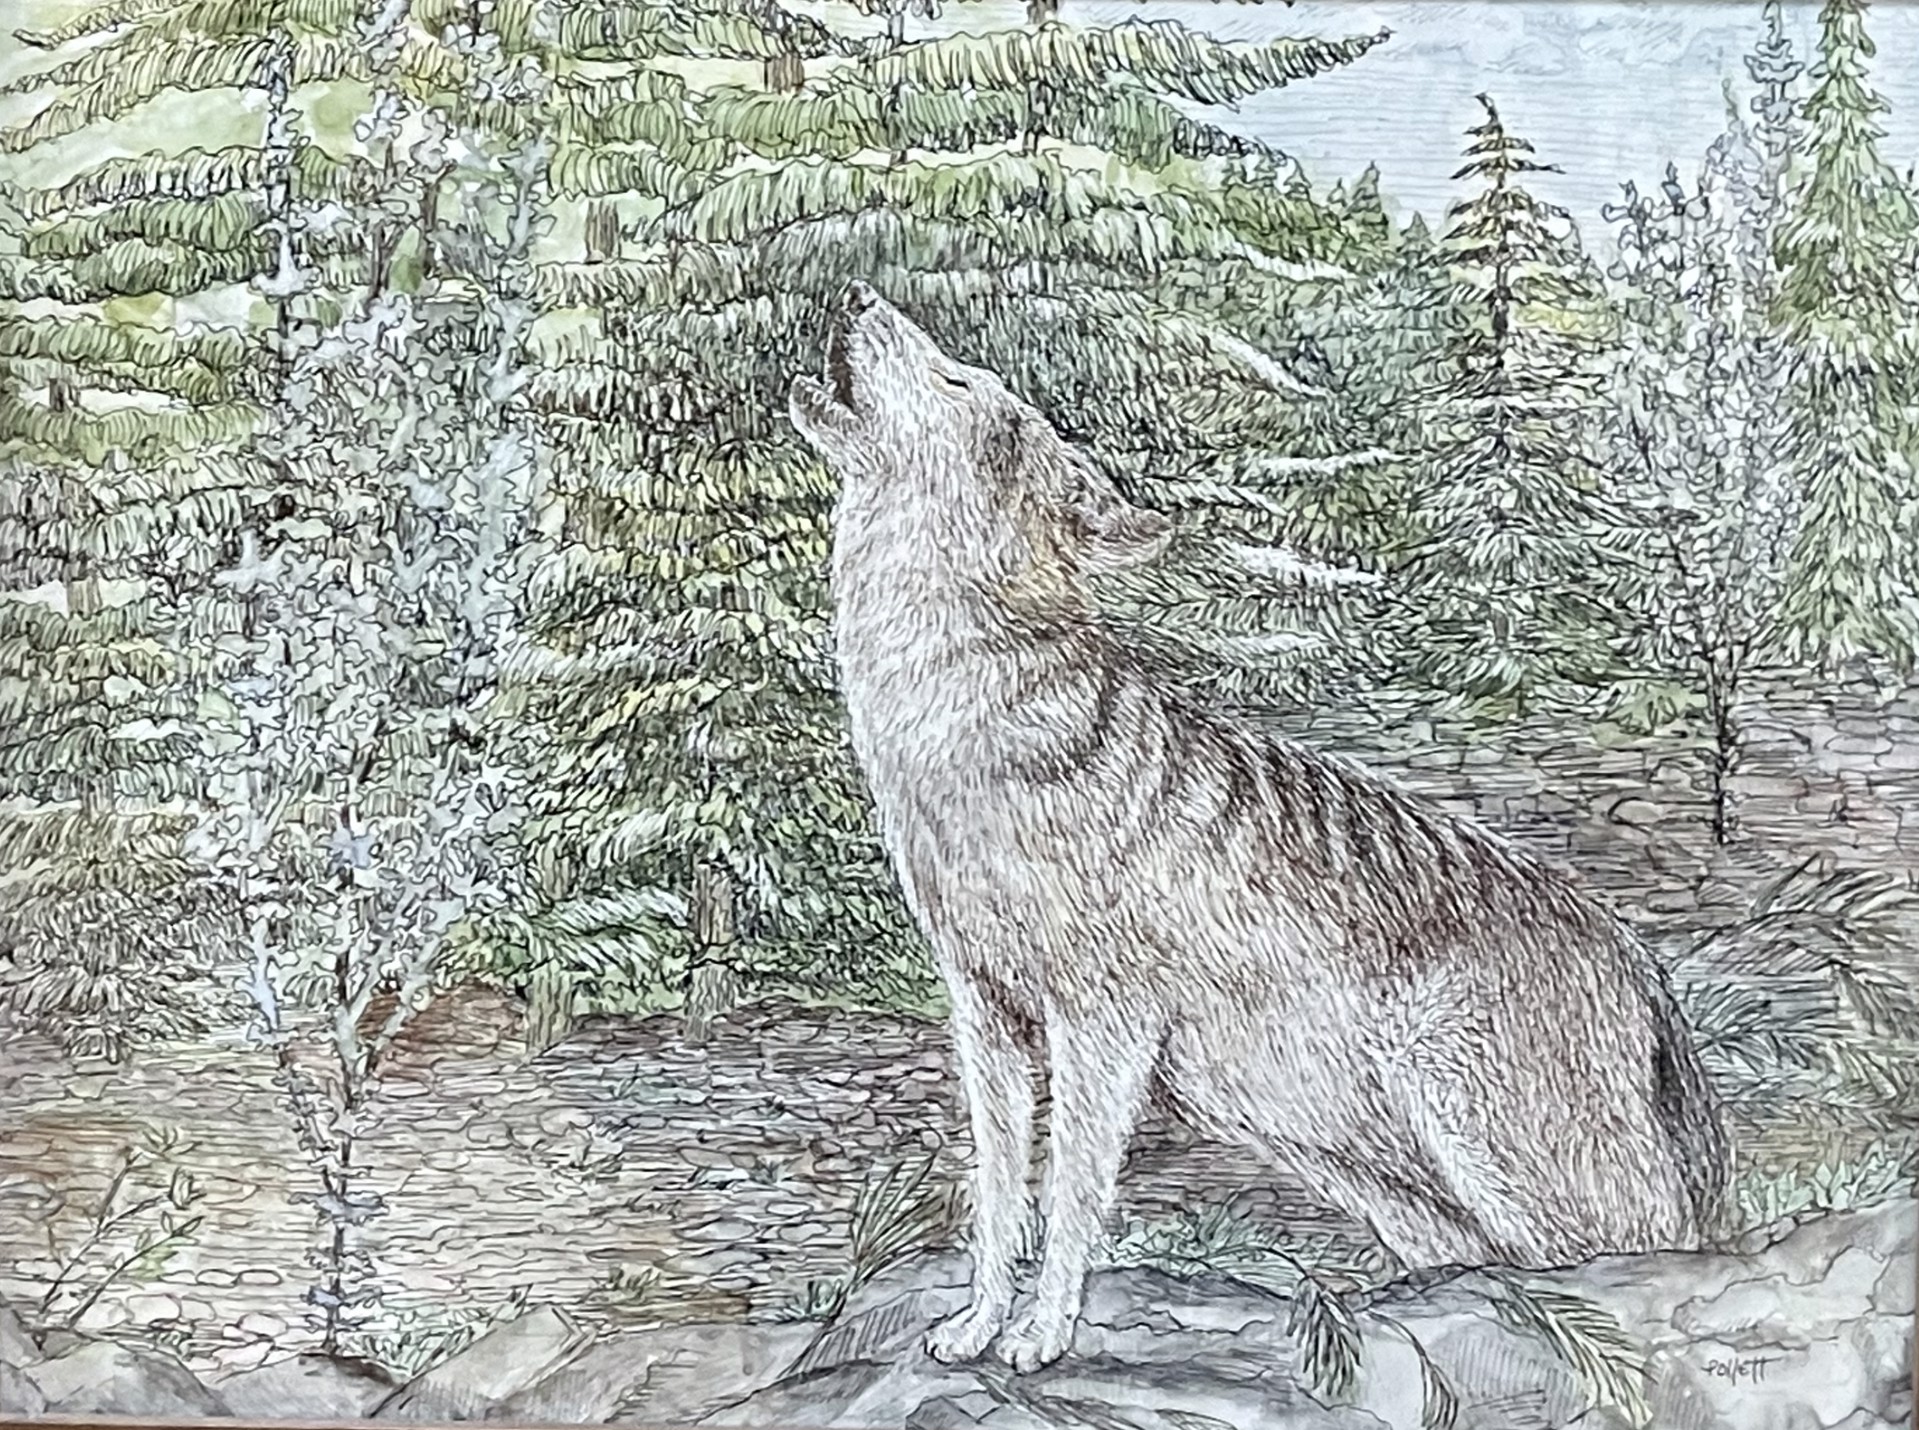 Song of the Wolf by Cynthia Jewell Pollett